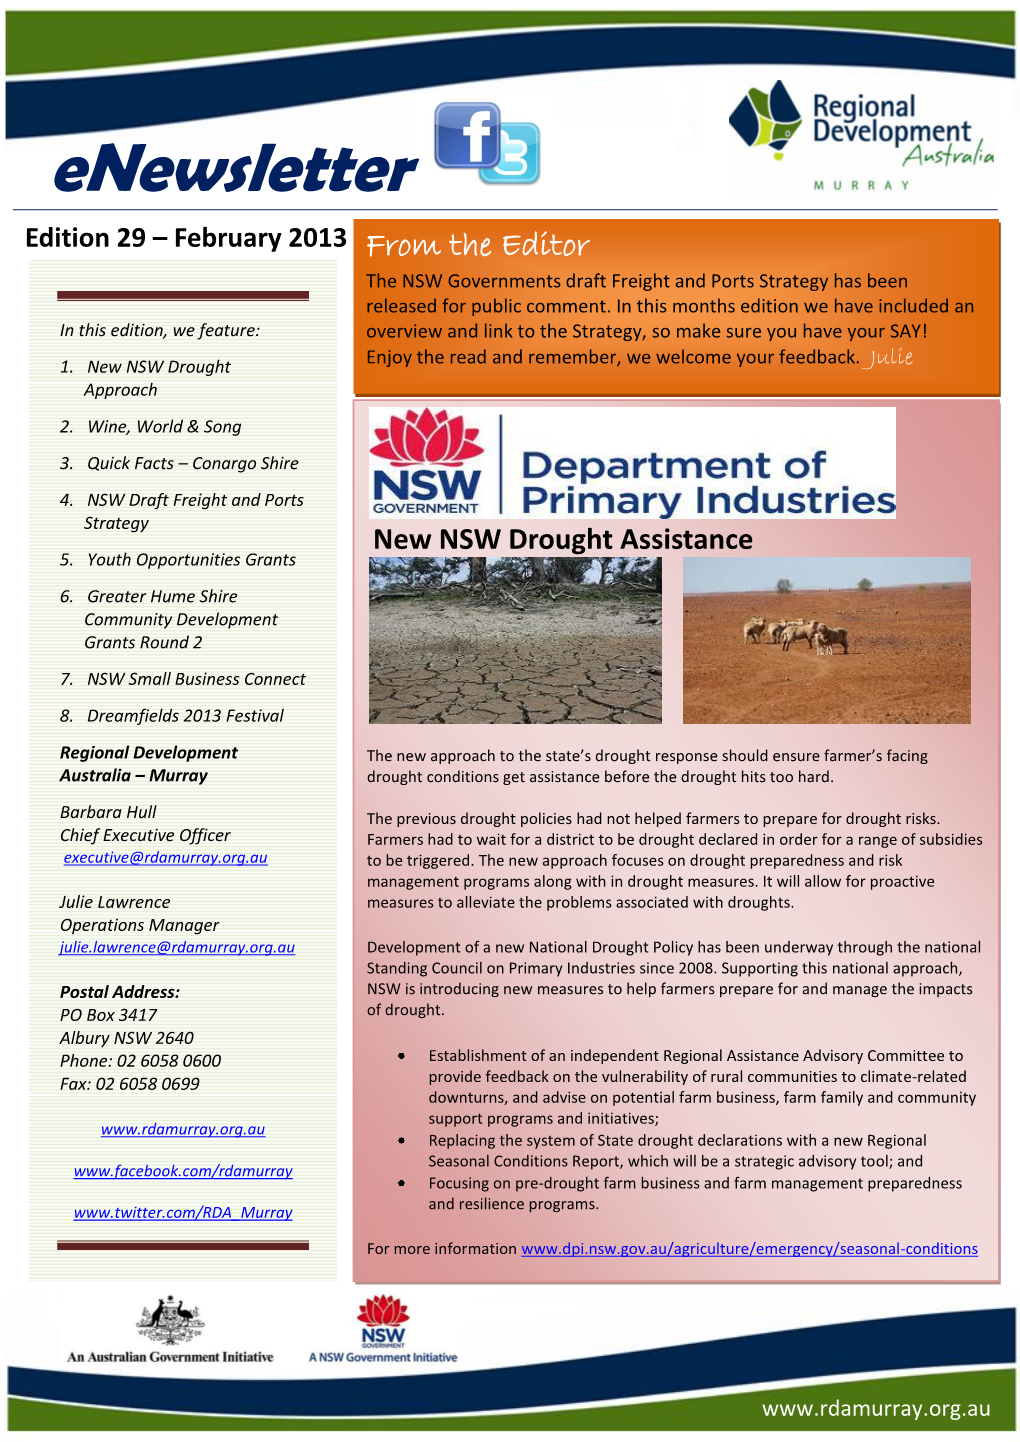 Enewsletter Edition 29 – February 2013 from the Editor